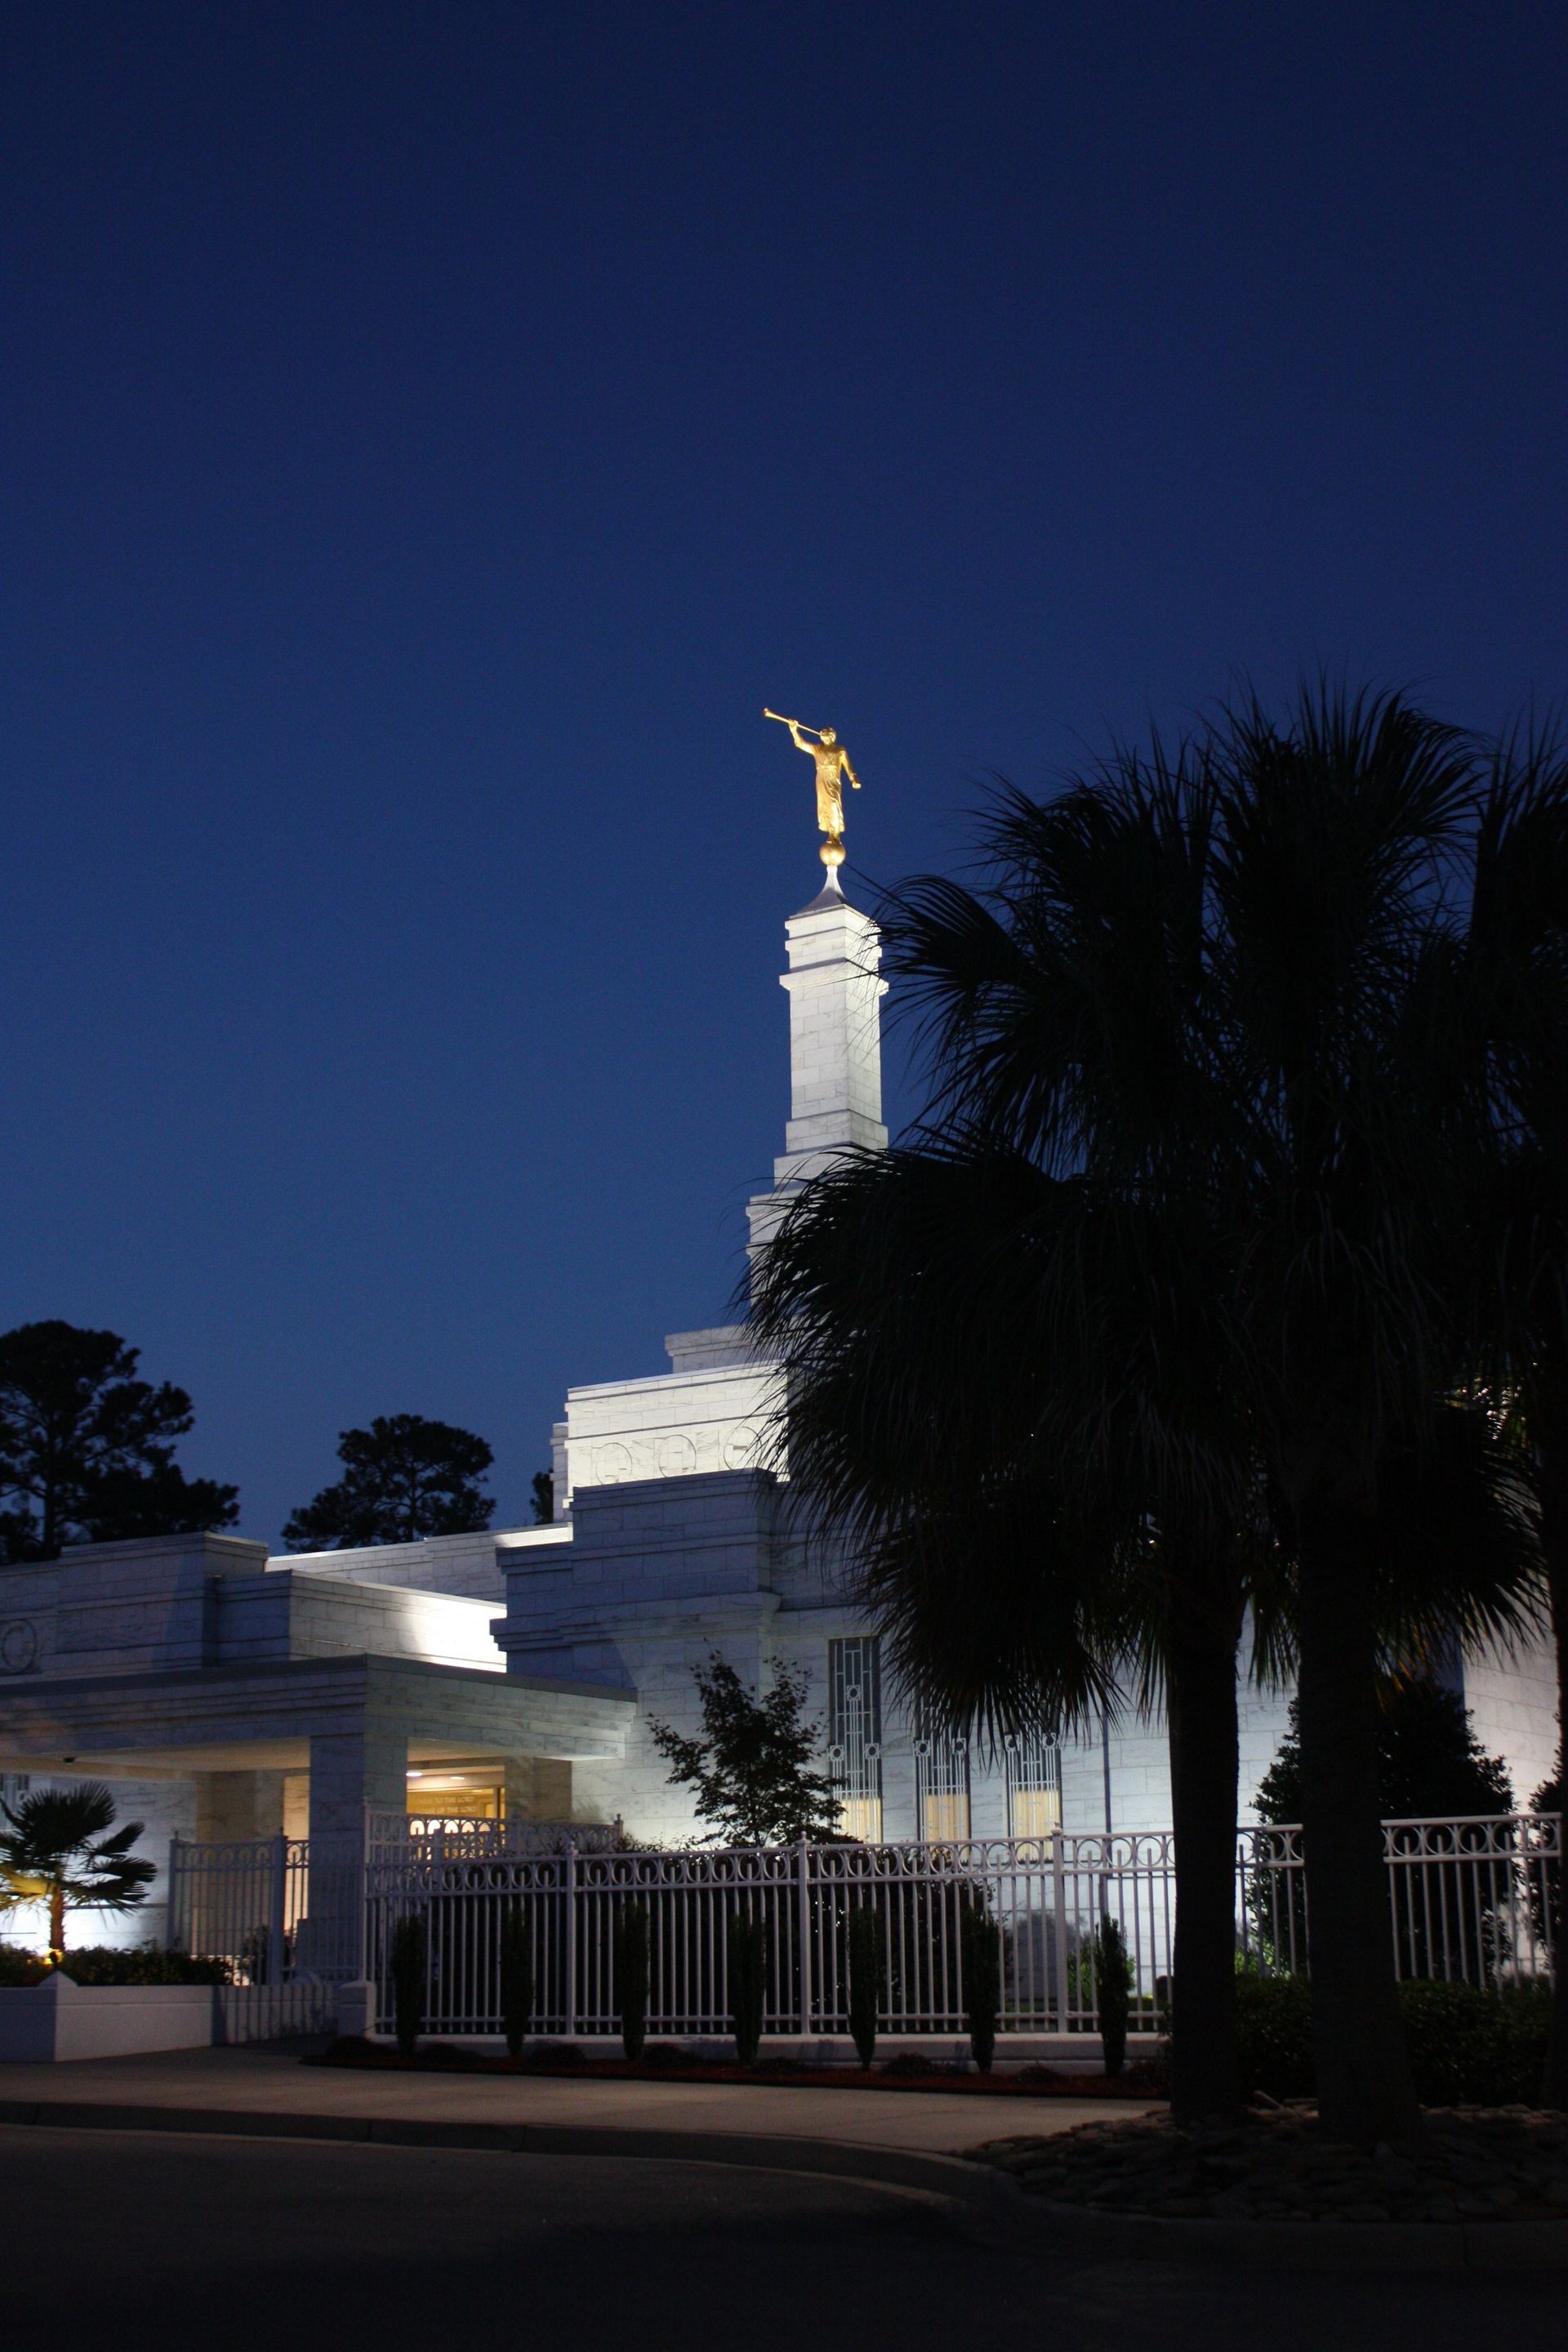 A portrait view of the Columbia South Carolina Temple at night.